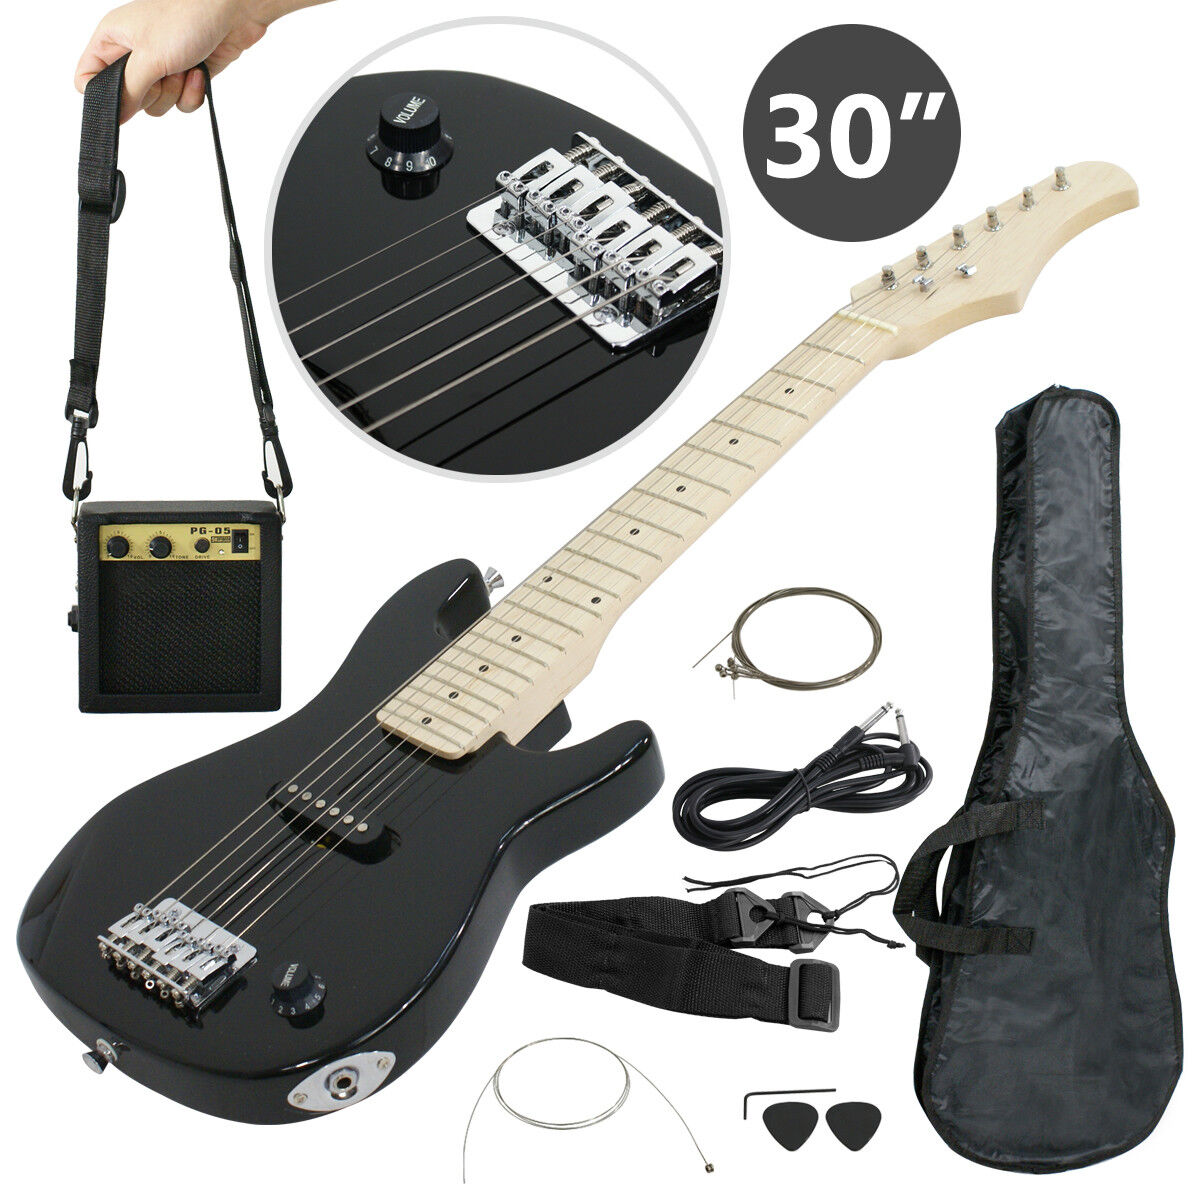 Child Electric Guitar Kids 30" Black Guitar With Amp + Case + Strap and More Segawe GG2008-Y01-1207A-1